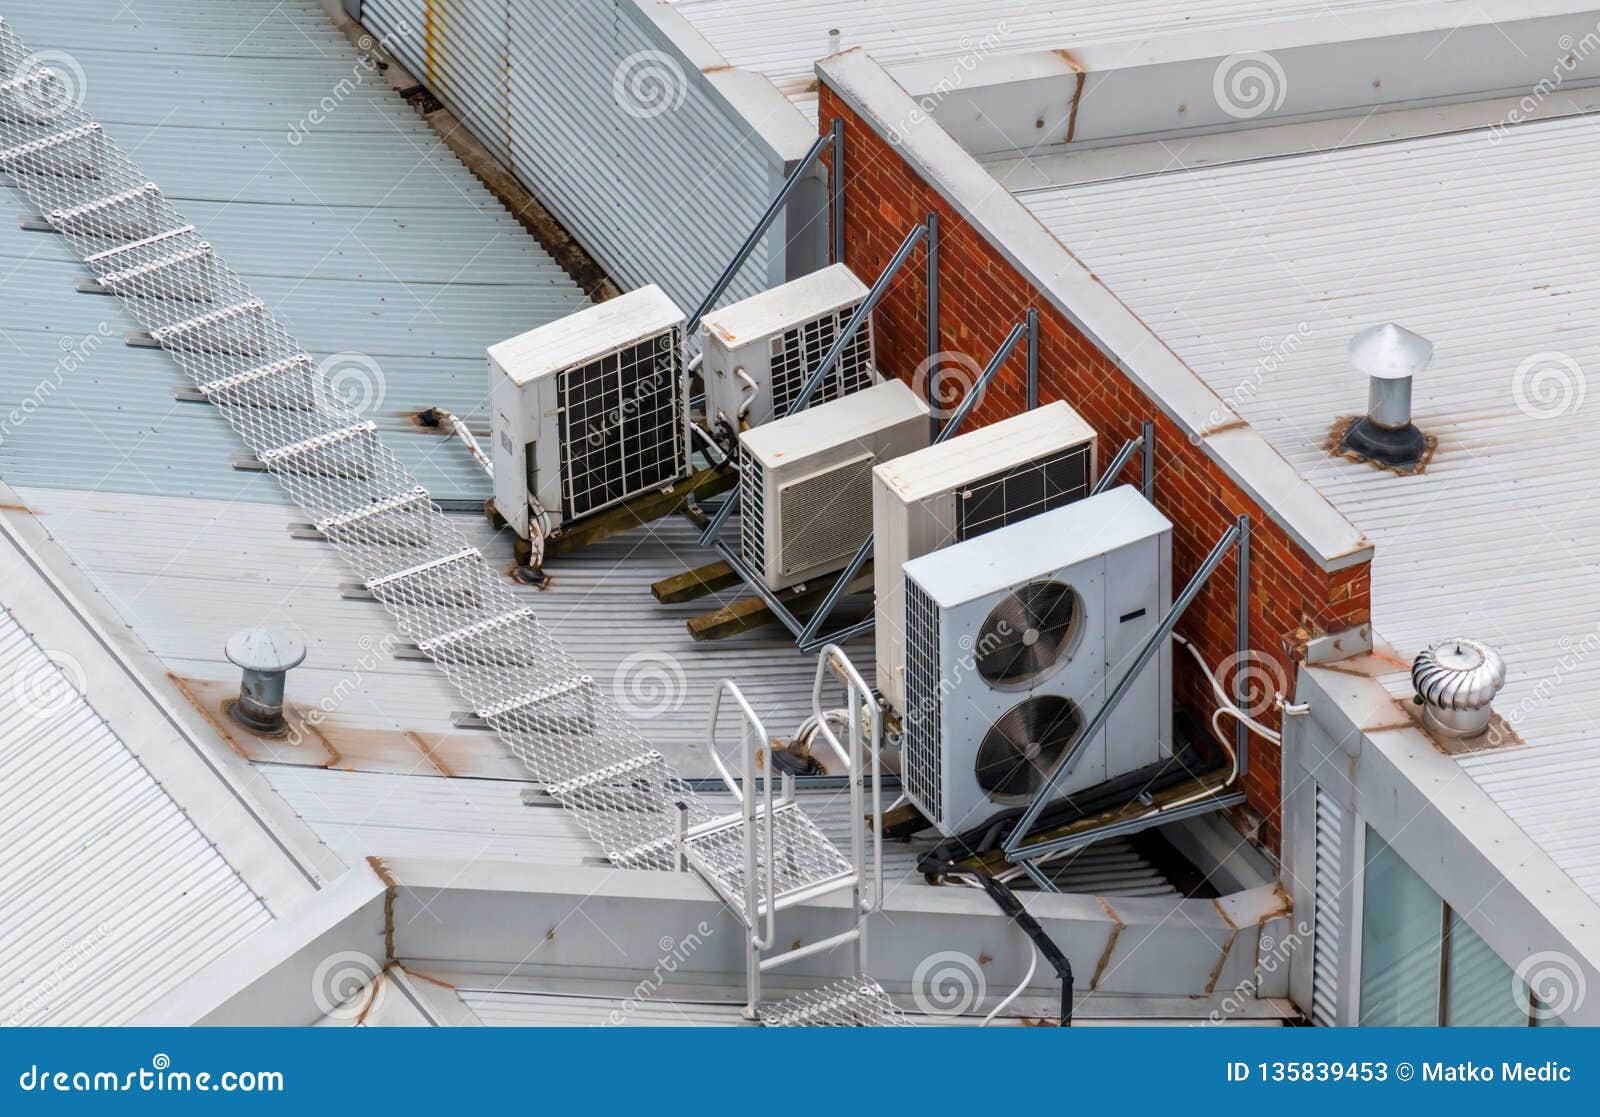 Air Conditioning System On The Roof Stock Image Image of energy, building 135839453